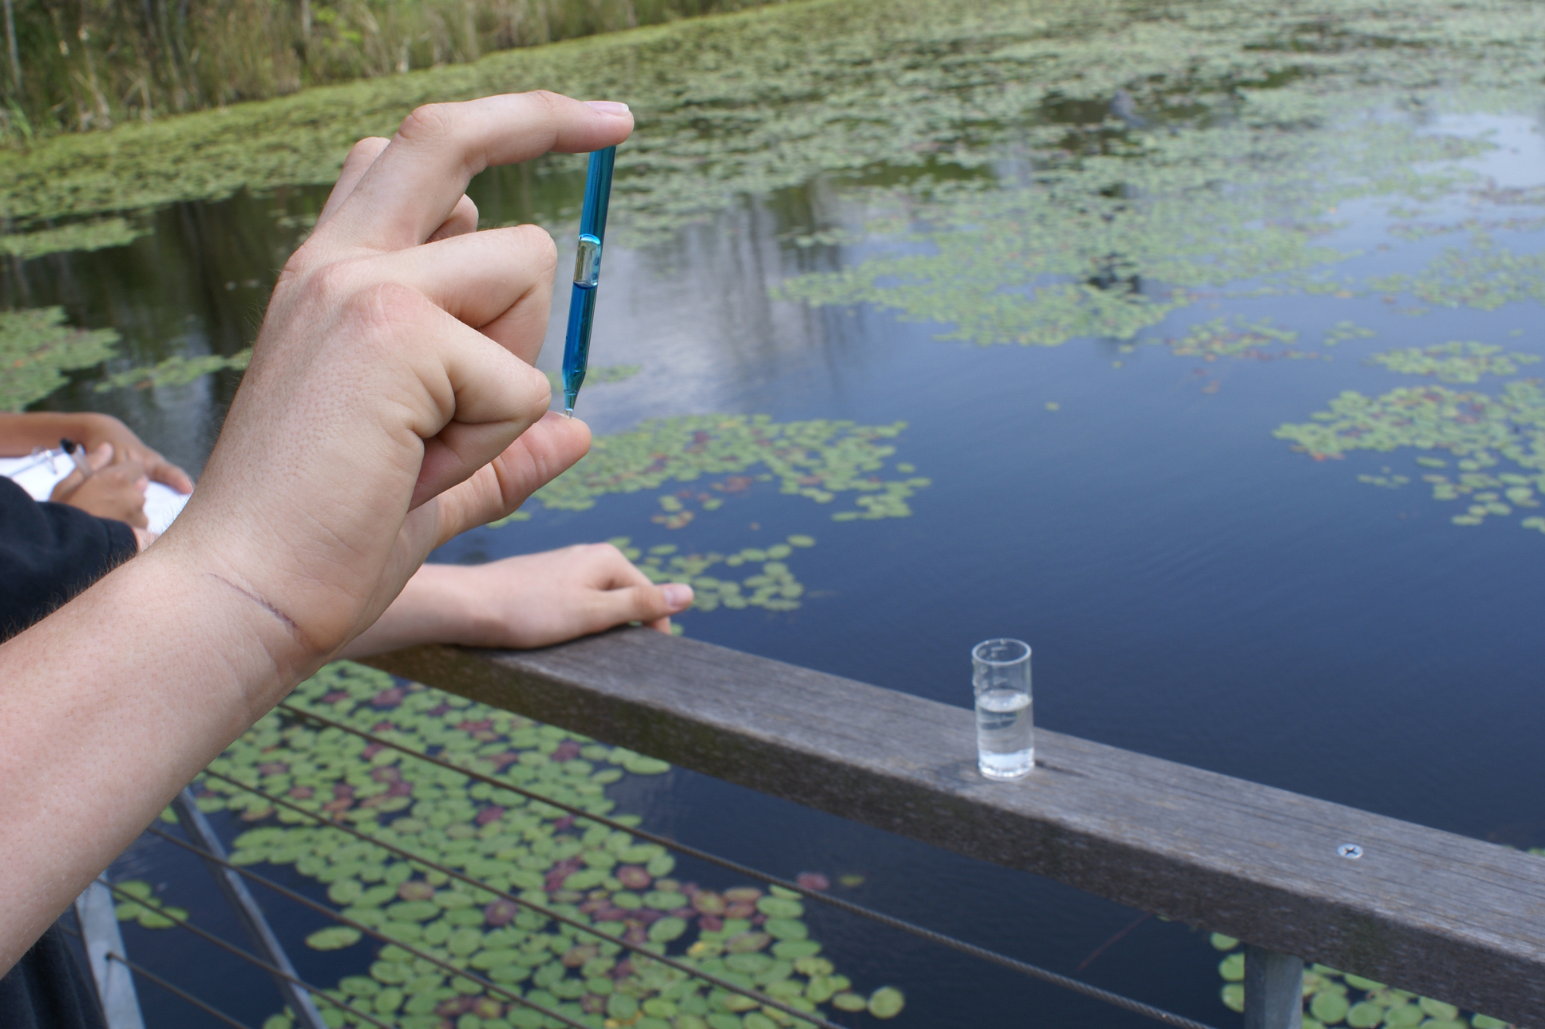 A hand holding up a blue test tube in front of a pond with railing. To the right, hands with a notebook are visible taking notes.